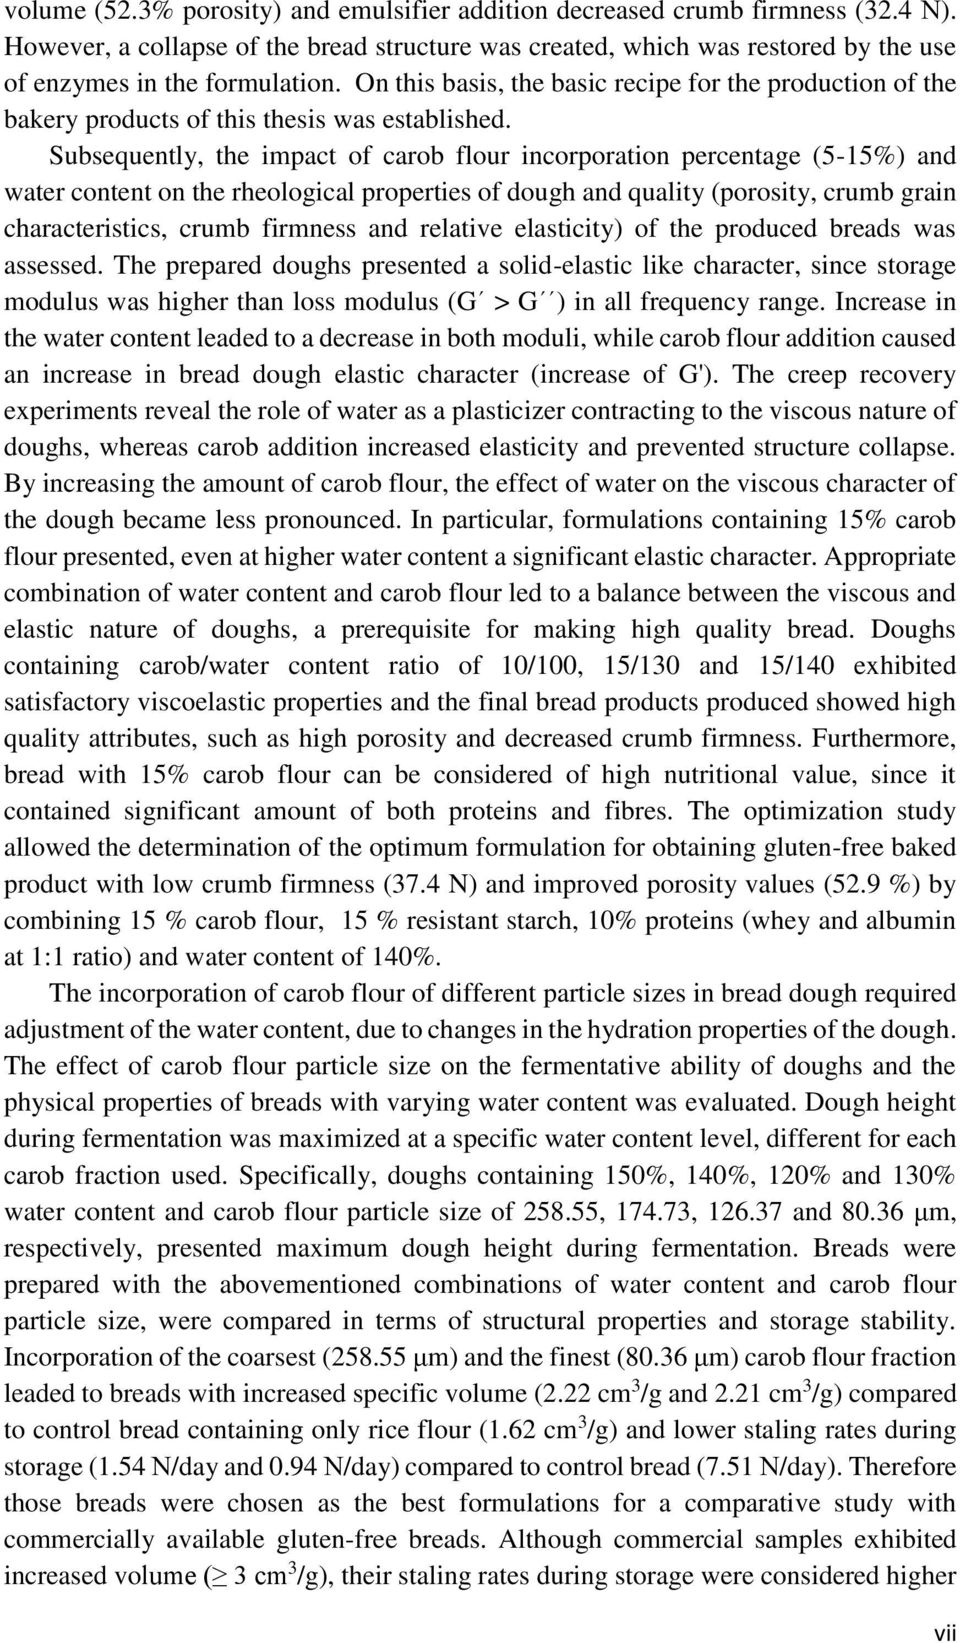 Subsequently, the impact of carob flour incorporation percentage (5-15%) and water content on the rheological properties of dough and quality (porosity, crumb grain characteristics, crumb firmness